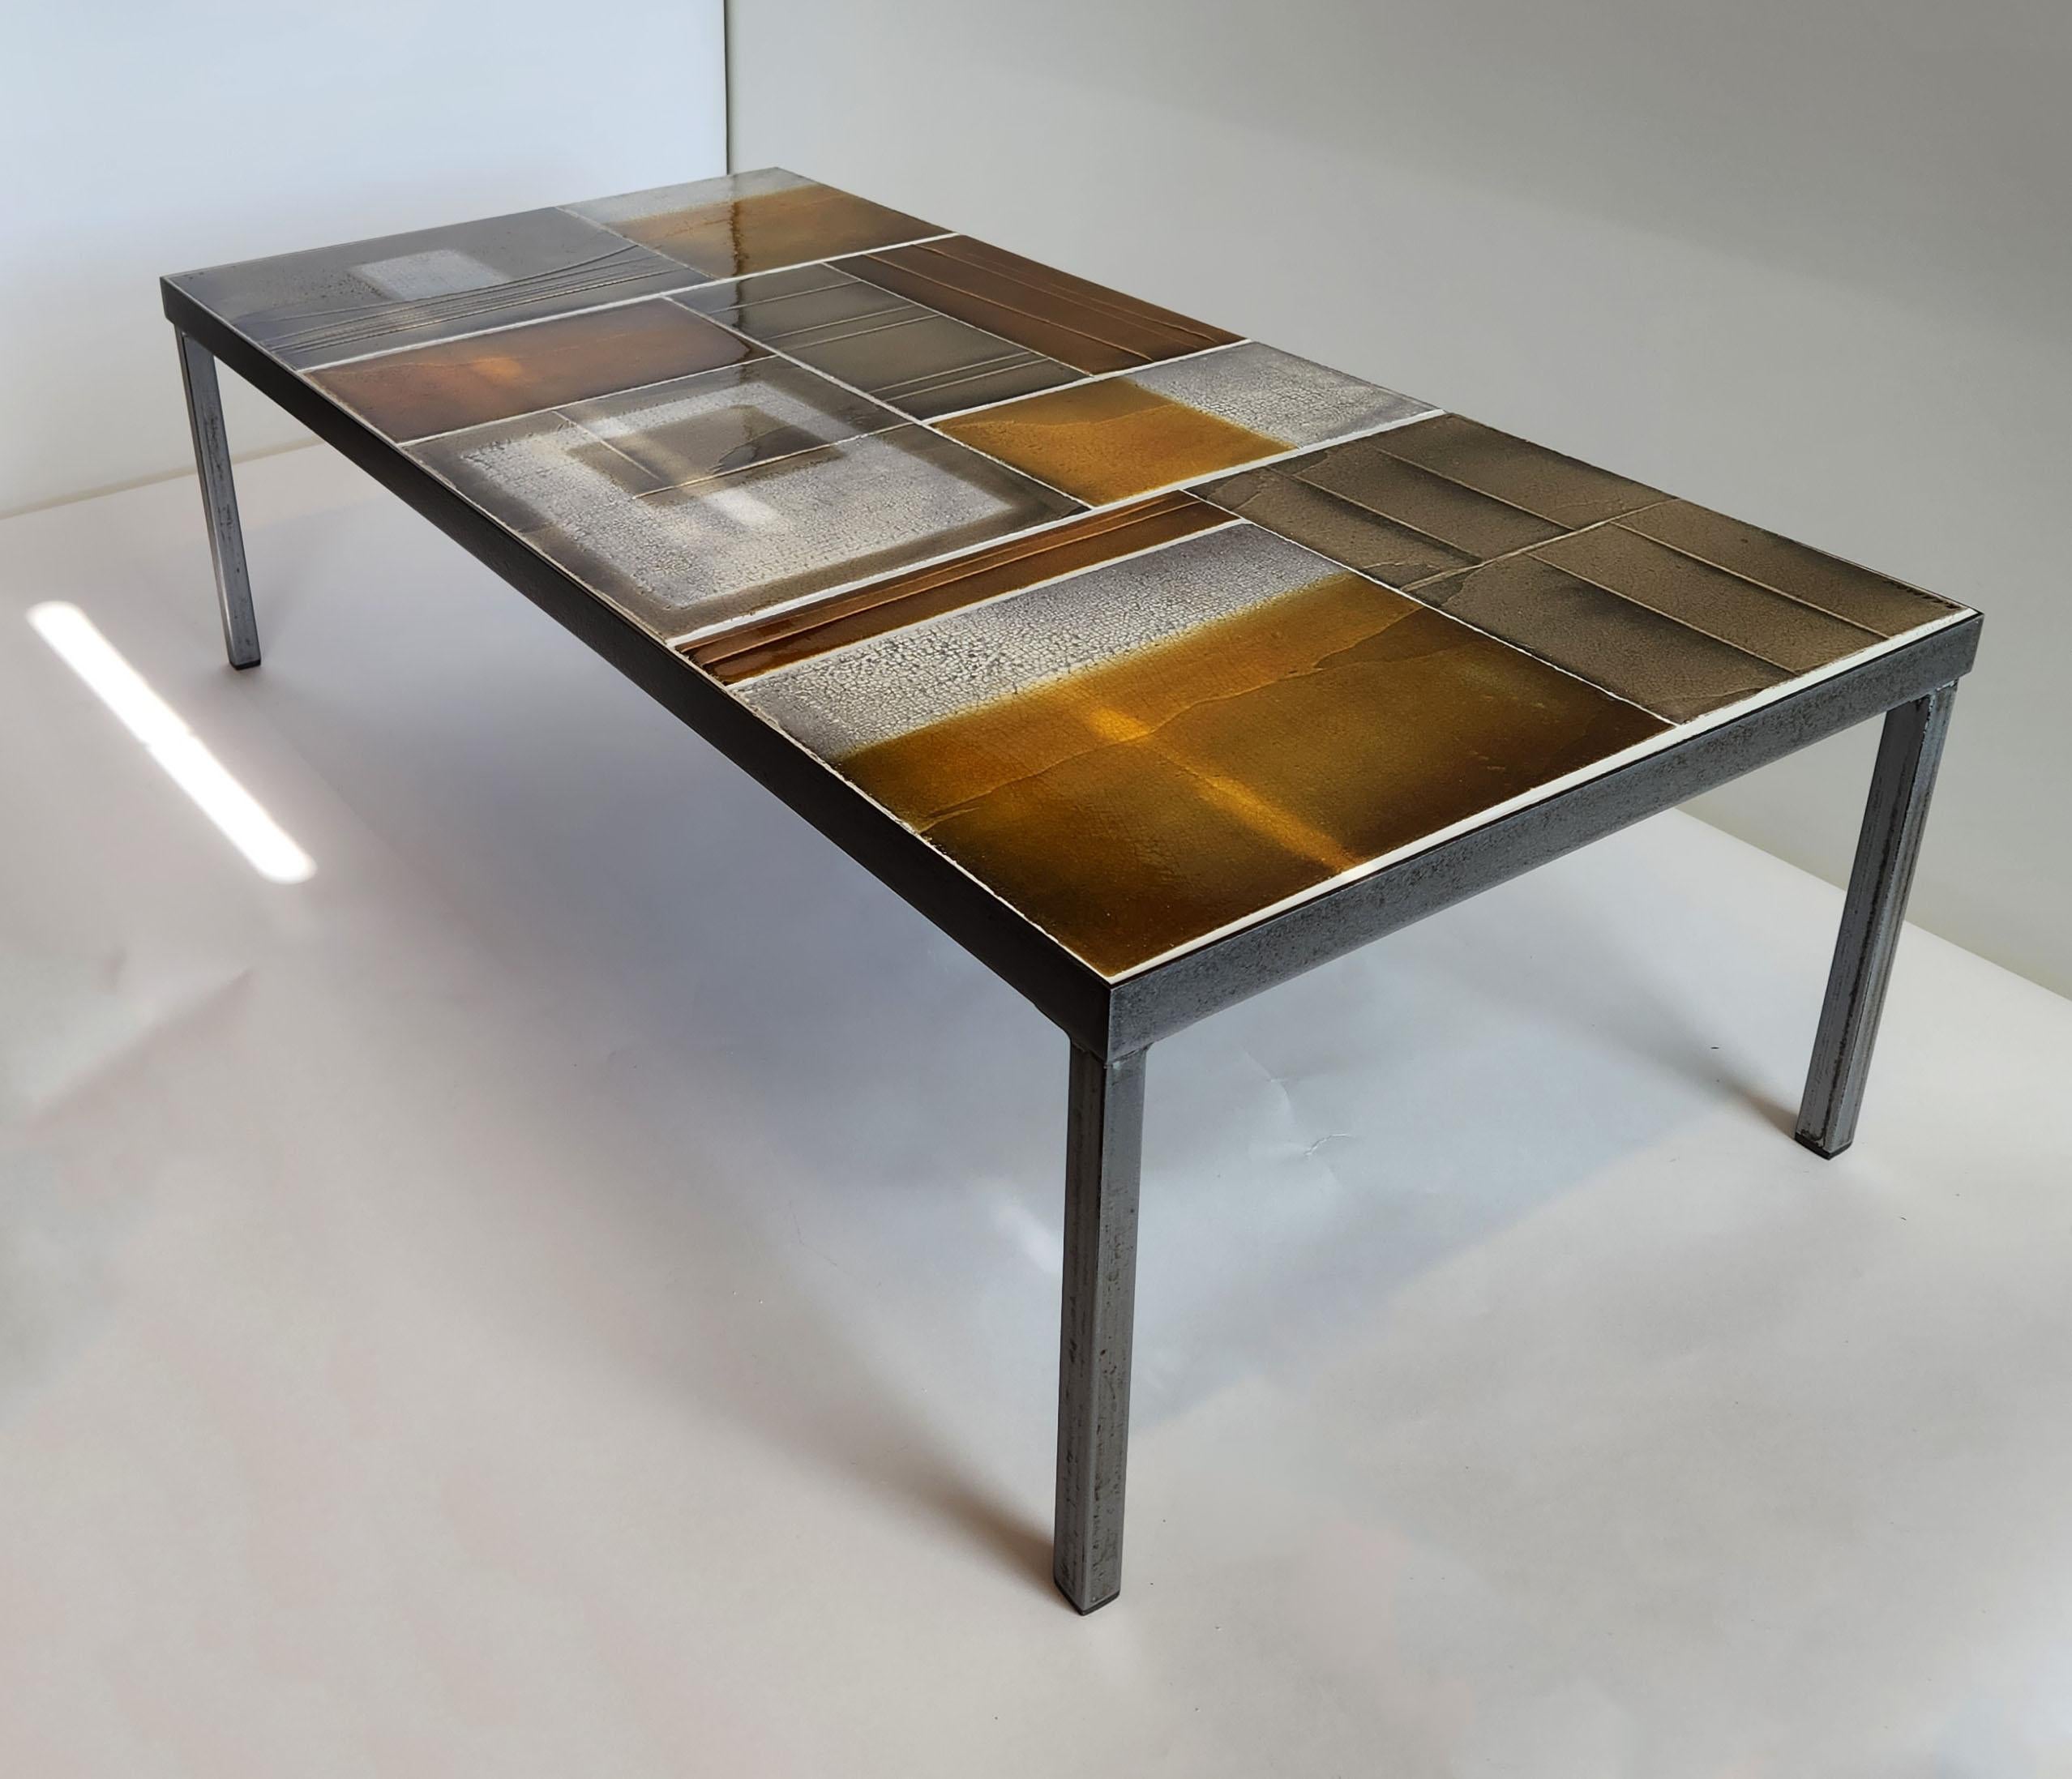 Looking for a spectacular ceramic coffee table! Look no further.

Ceramic top with pleasing modulations and contrasts between colors (Off-white, gray, amber and gold), textures (smooth, rough), linings (texture lines, designed lines and grout